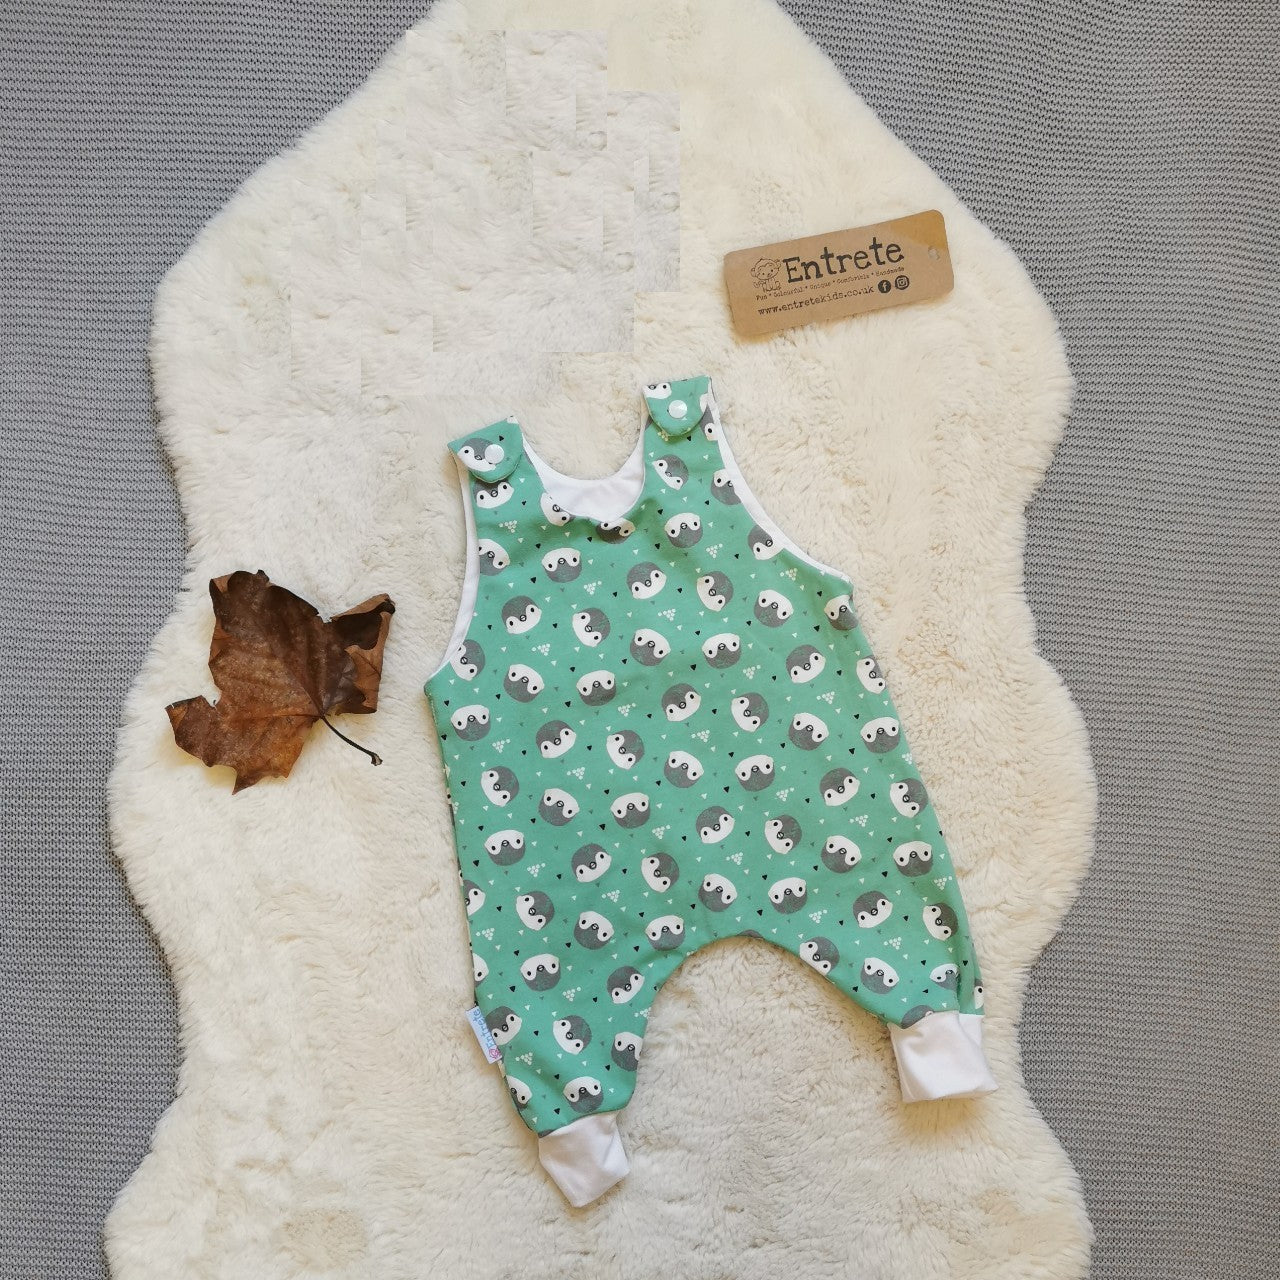 The gorgeously ethical organic mint penguins sleeveless romper. Handmade using mint penguins and white organic cotton jerseys' with a natural bamboo lining.